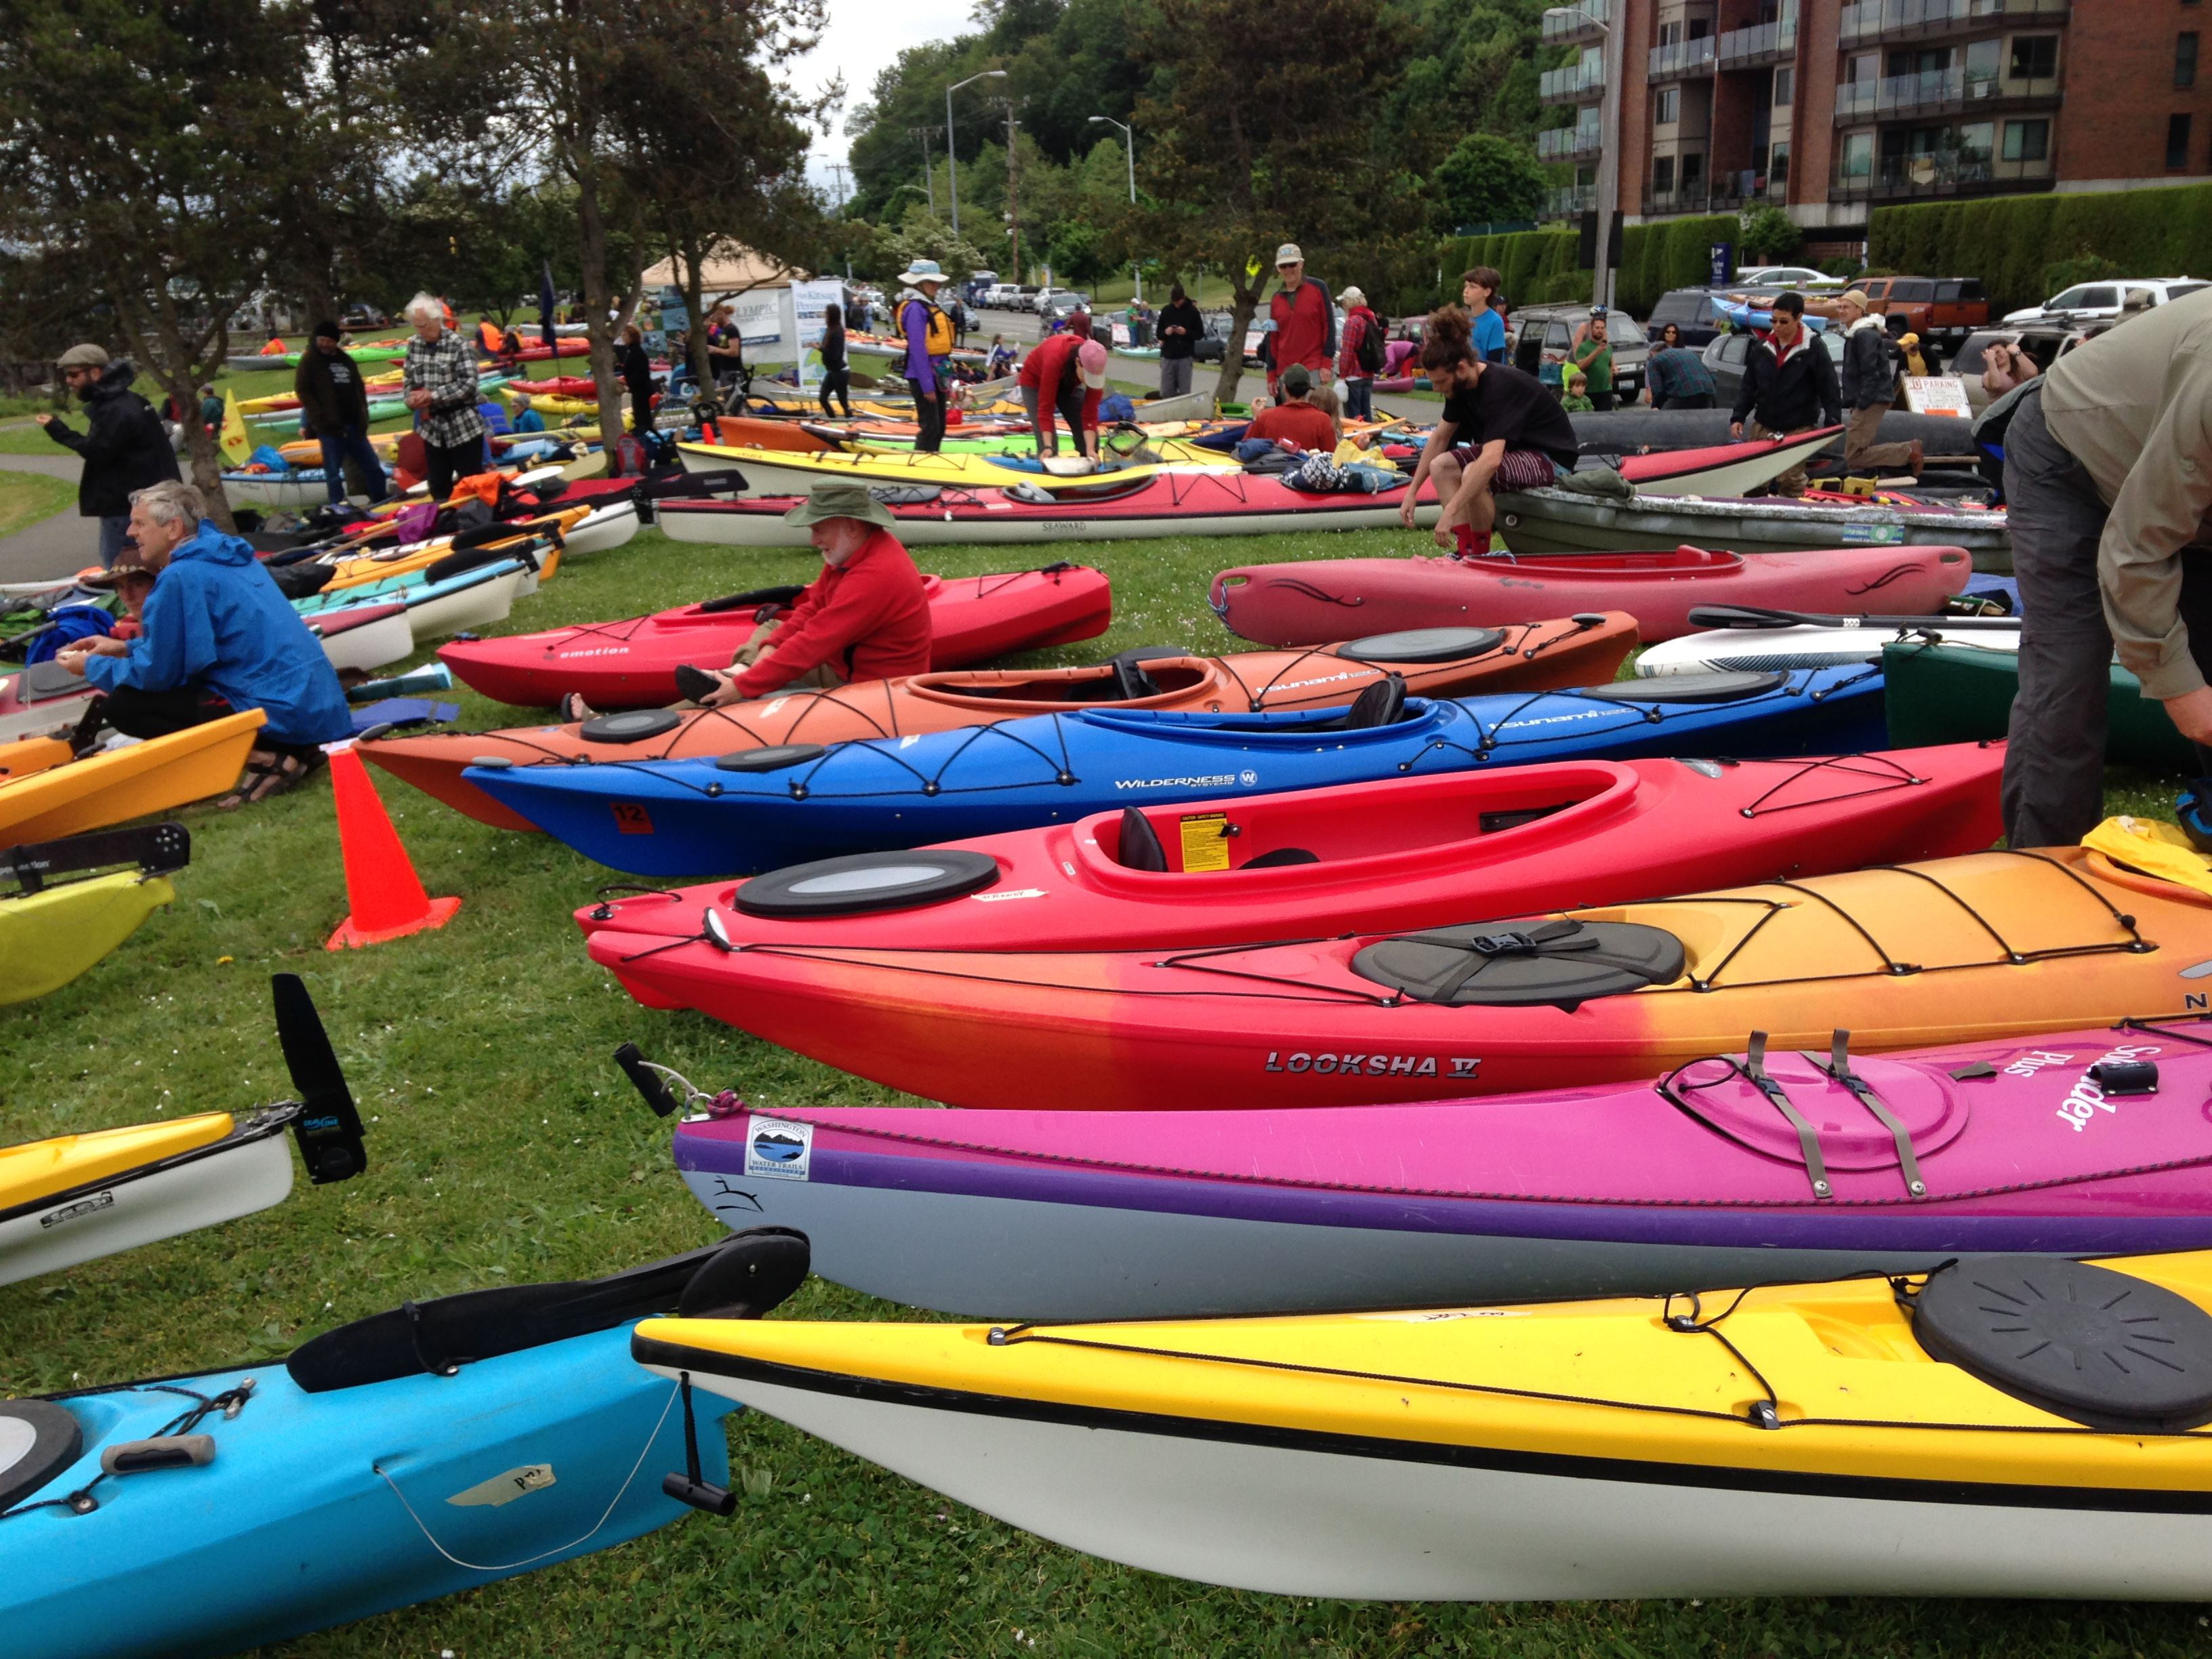 Activists who oppose Royal Dutch Shell's plans to drill for oil in the Arctic Ocean prepare their kayaks for the 